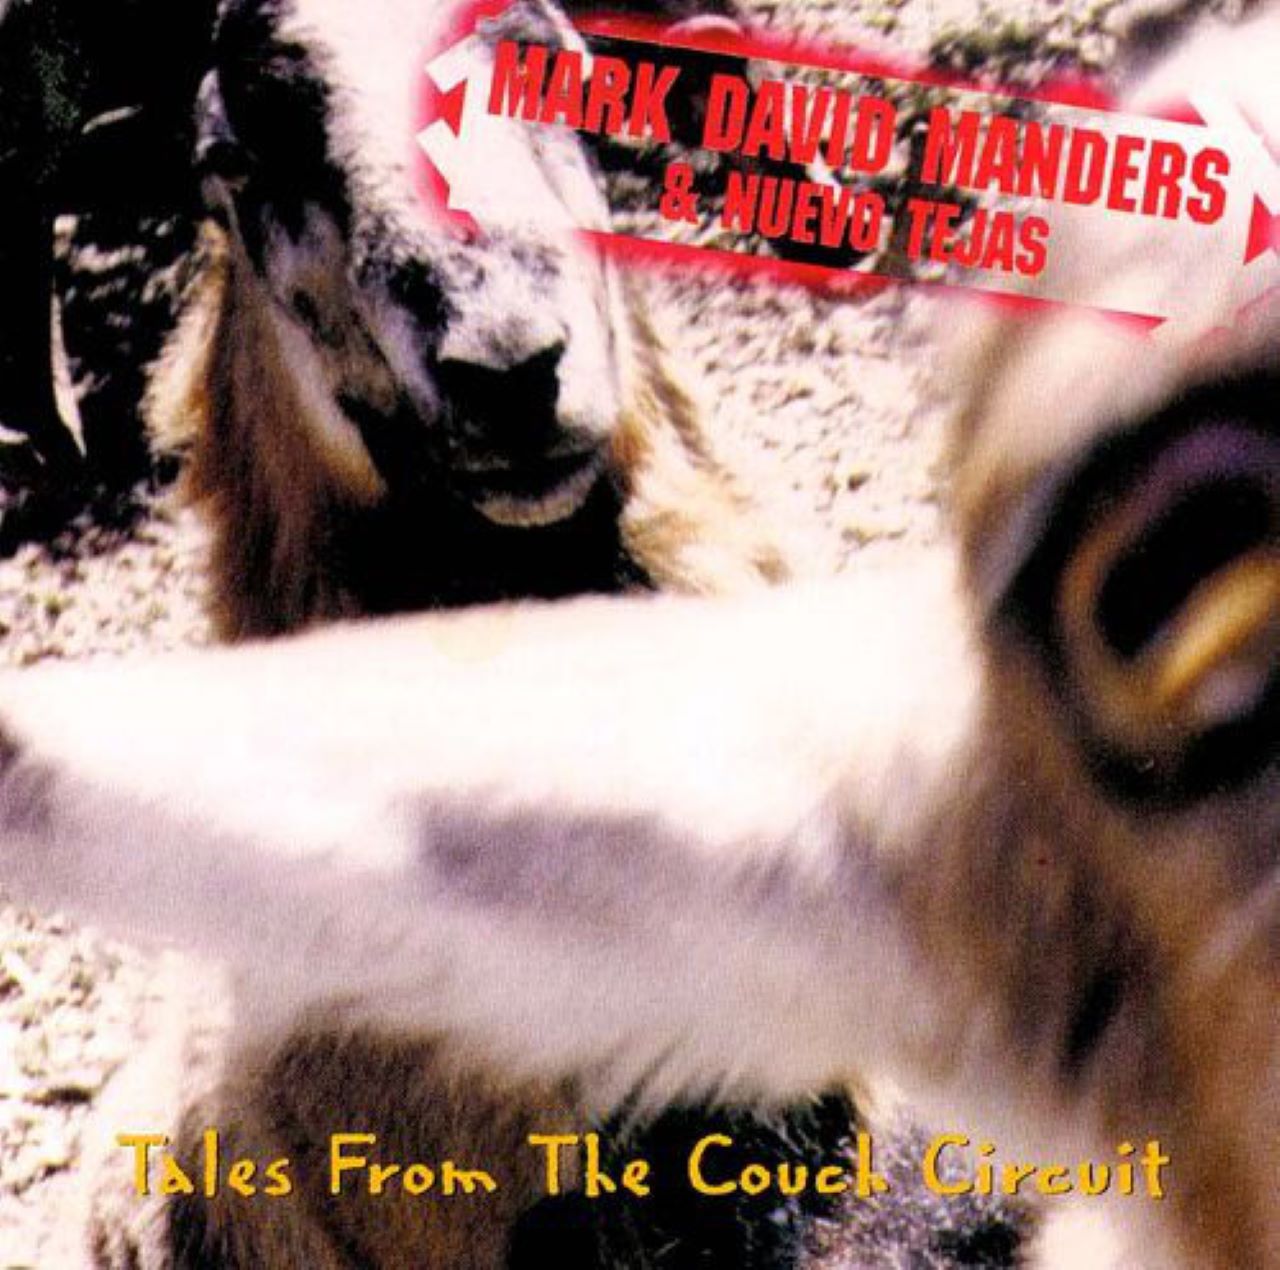 Mark David Manders & Nuevo Tejas - Tales From The Couch Circuit cover album